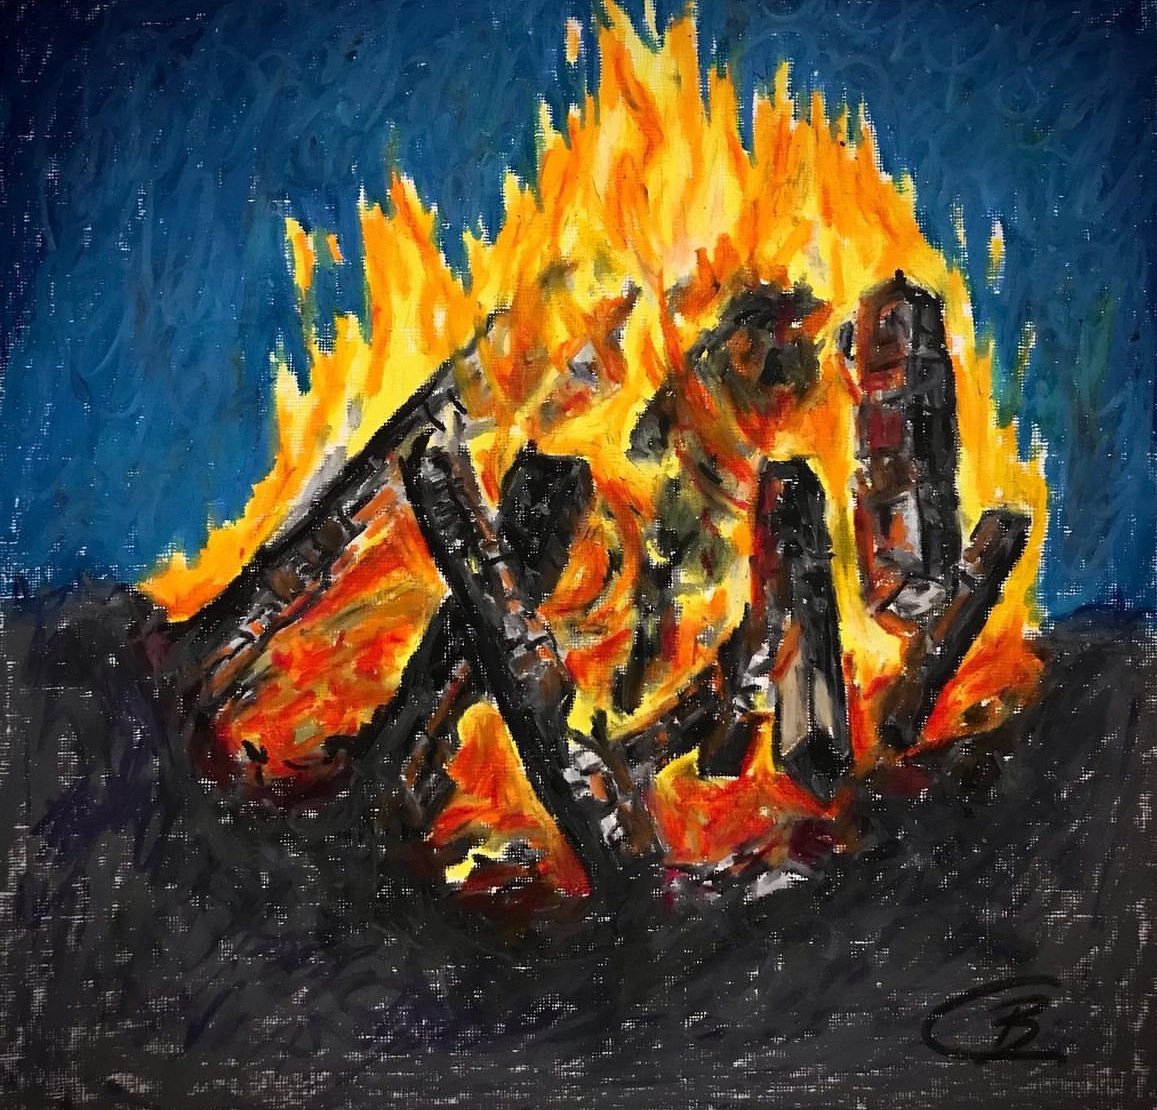 Just feeling like a FIRE with Oil Pastels. Maybe my mood was a bit out of the ordinary that day when I painted it? 

#oilpastels #painting #fire #canadianartist